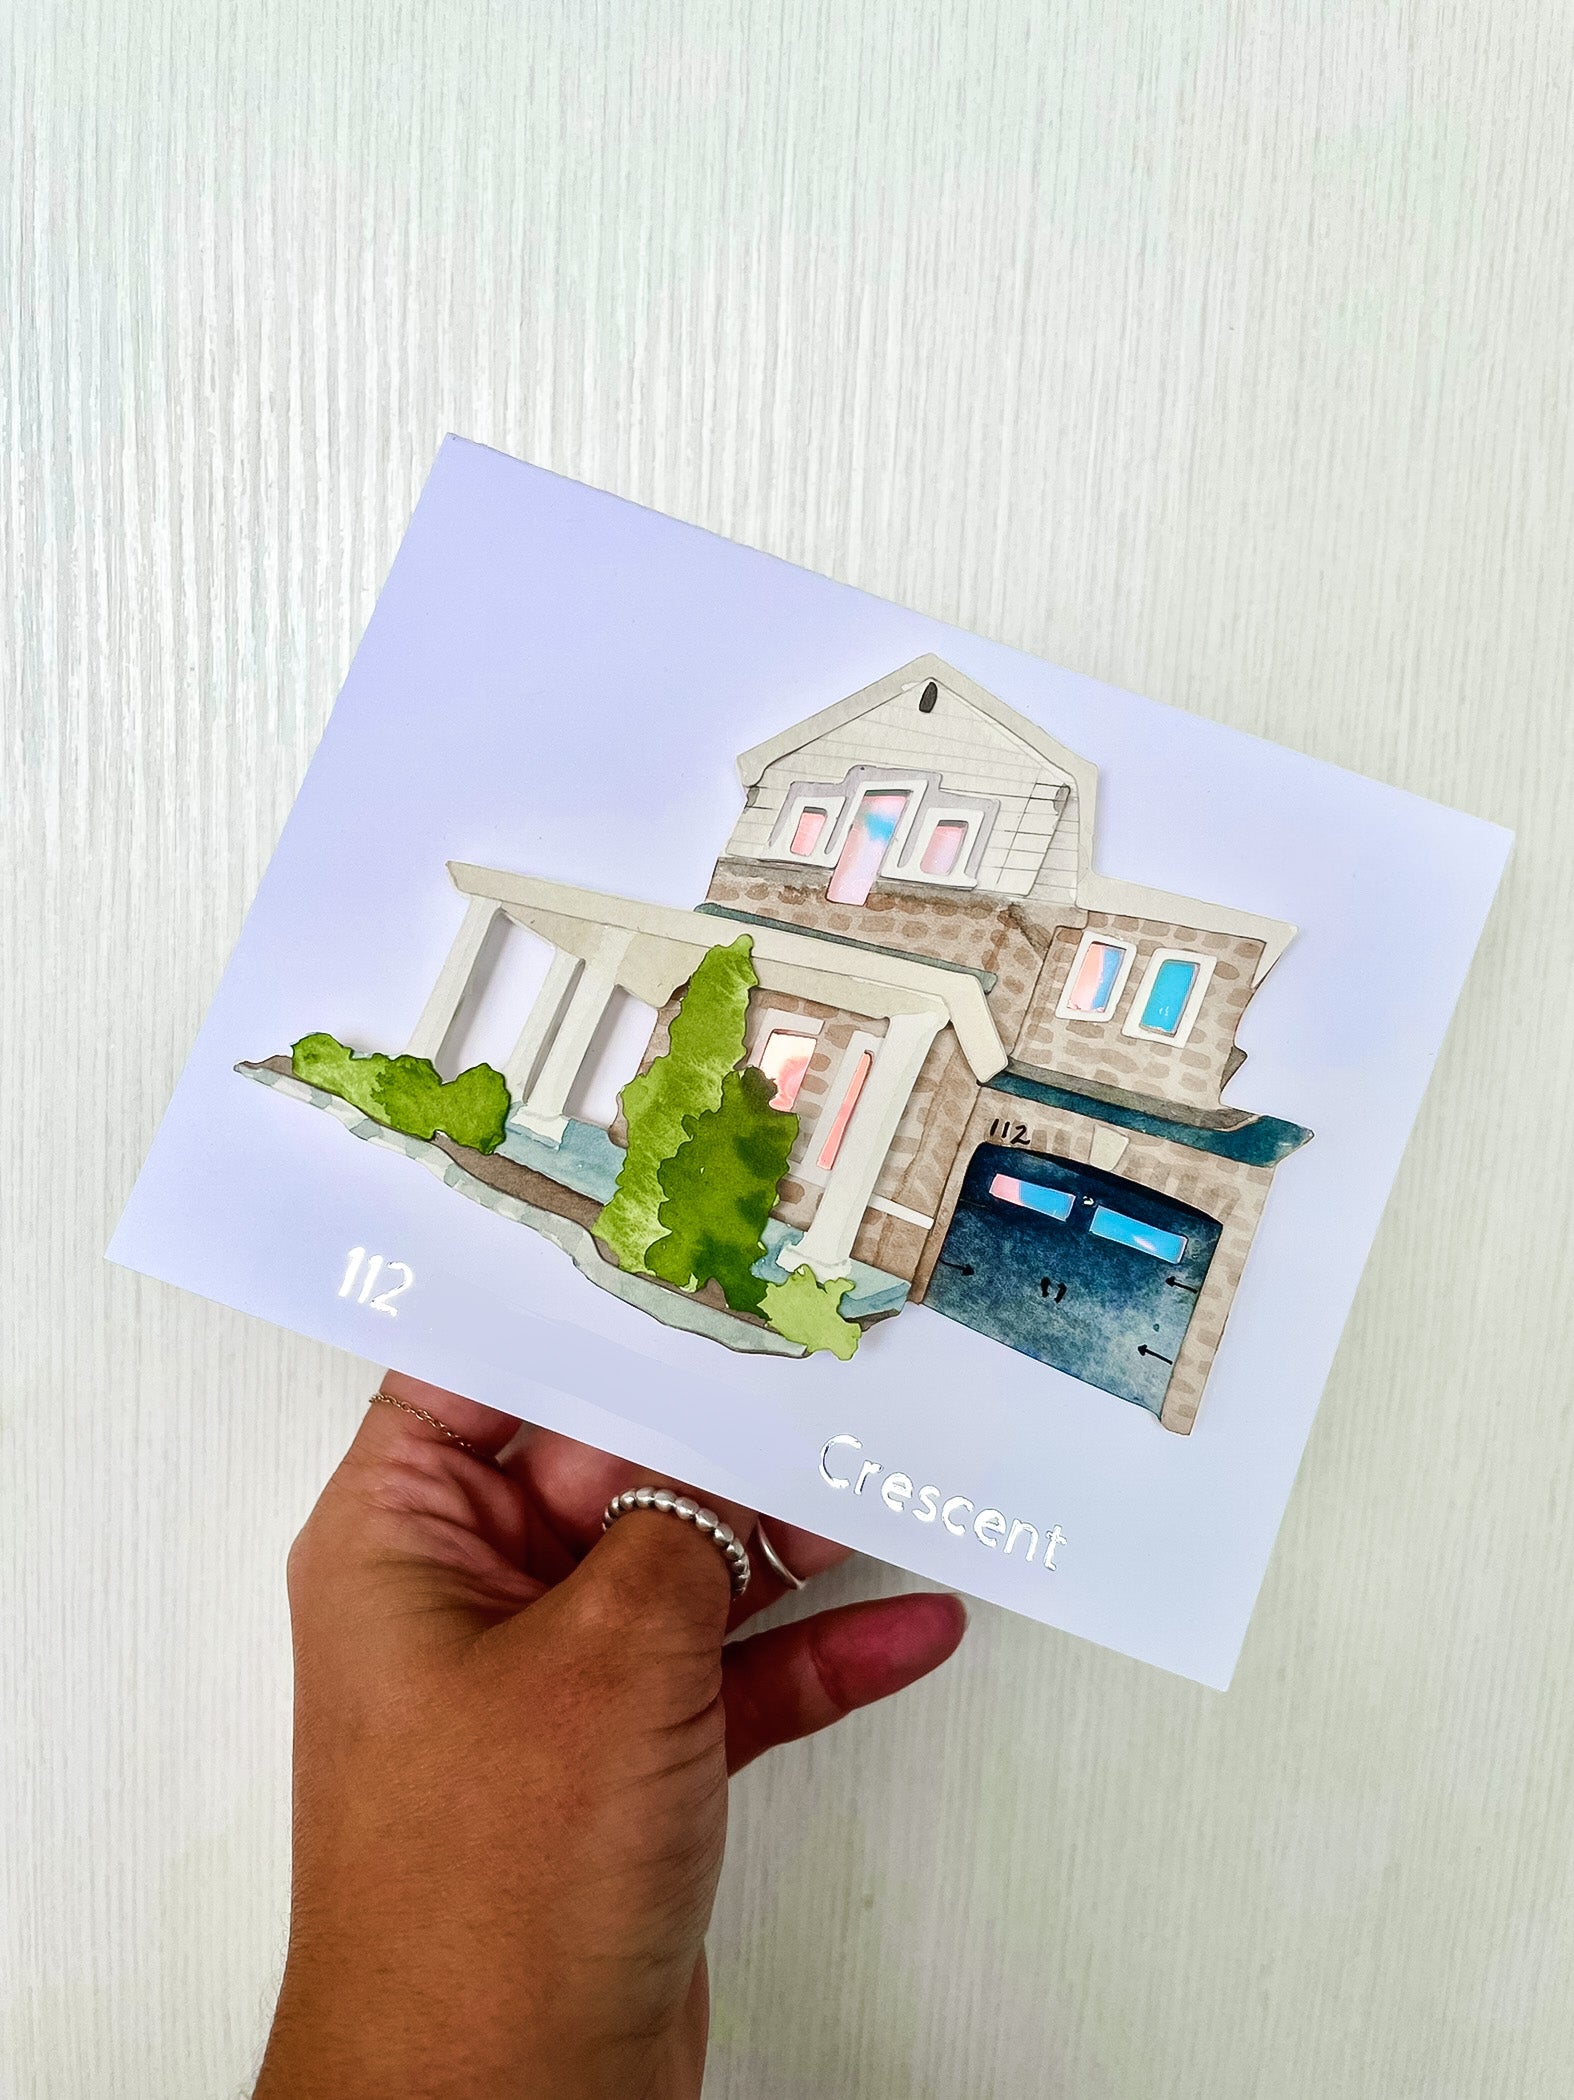 Custom made cards. Custom greeting cards. Handmade greeting cards. House portrait. Housewarming gift. Housewarming card for real estate clients.